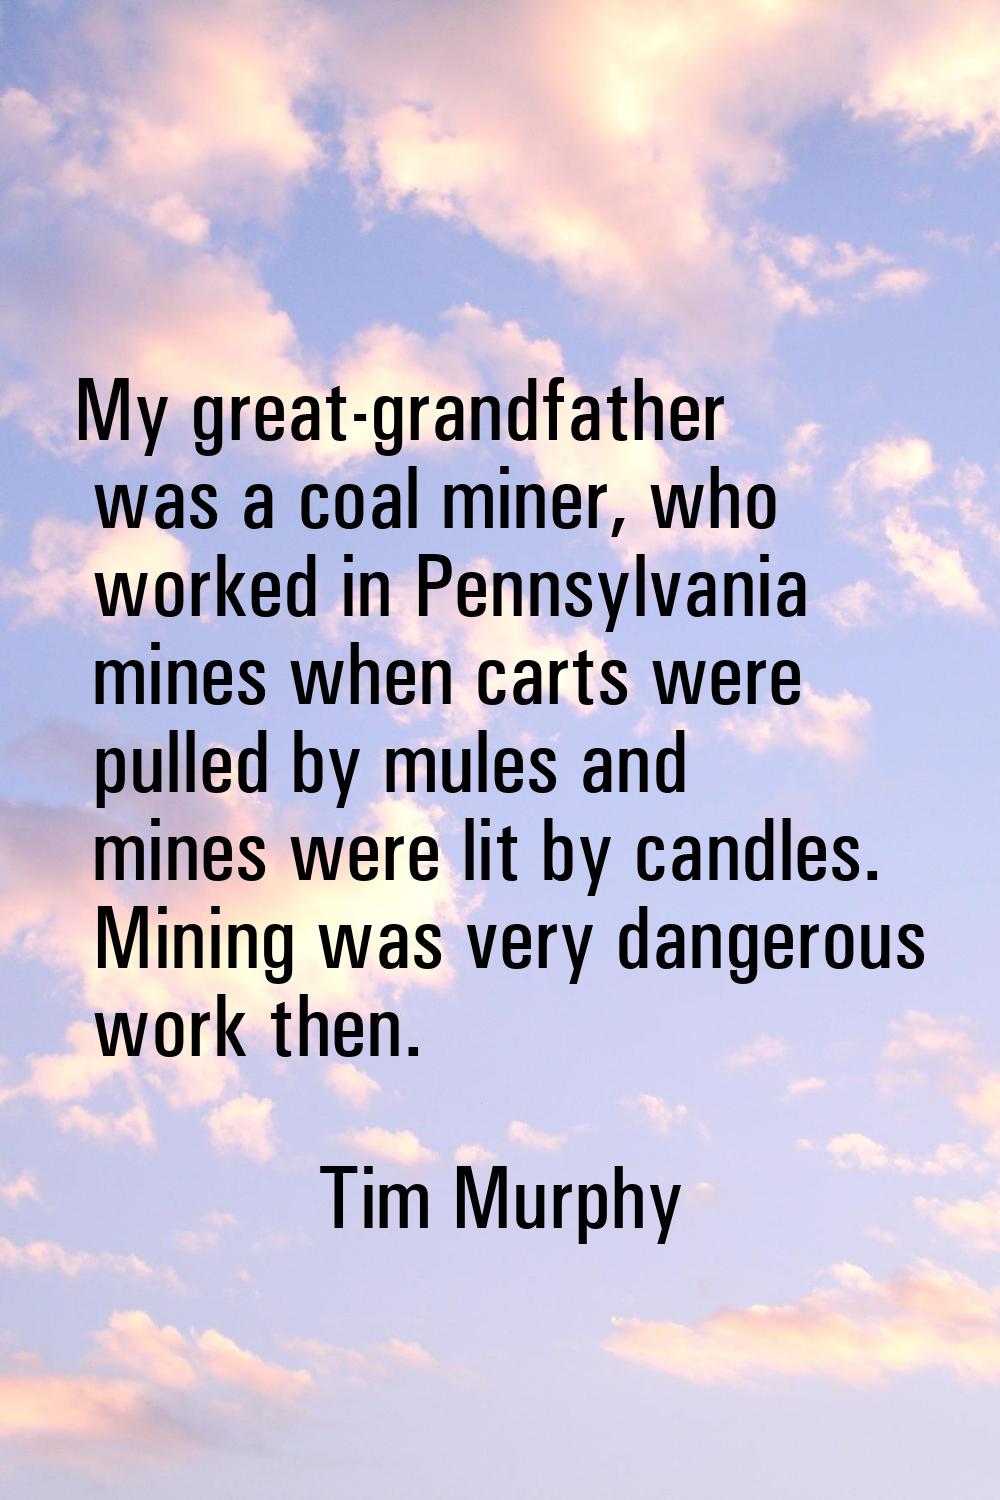 My great-grandfather was a coal miner, who worked in Pennsylvania mines when carts were pulled by m